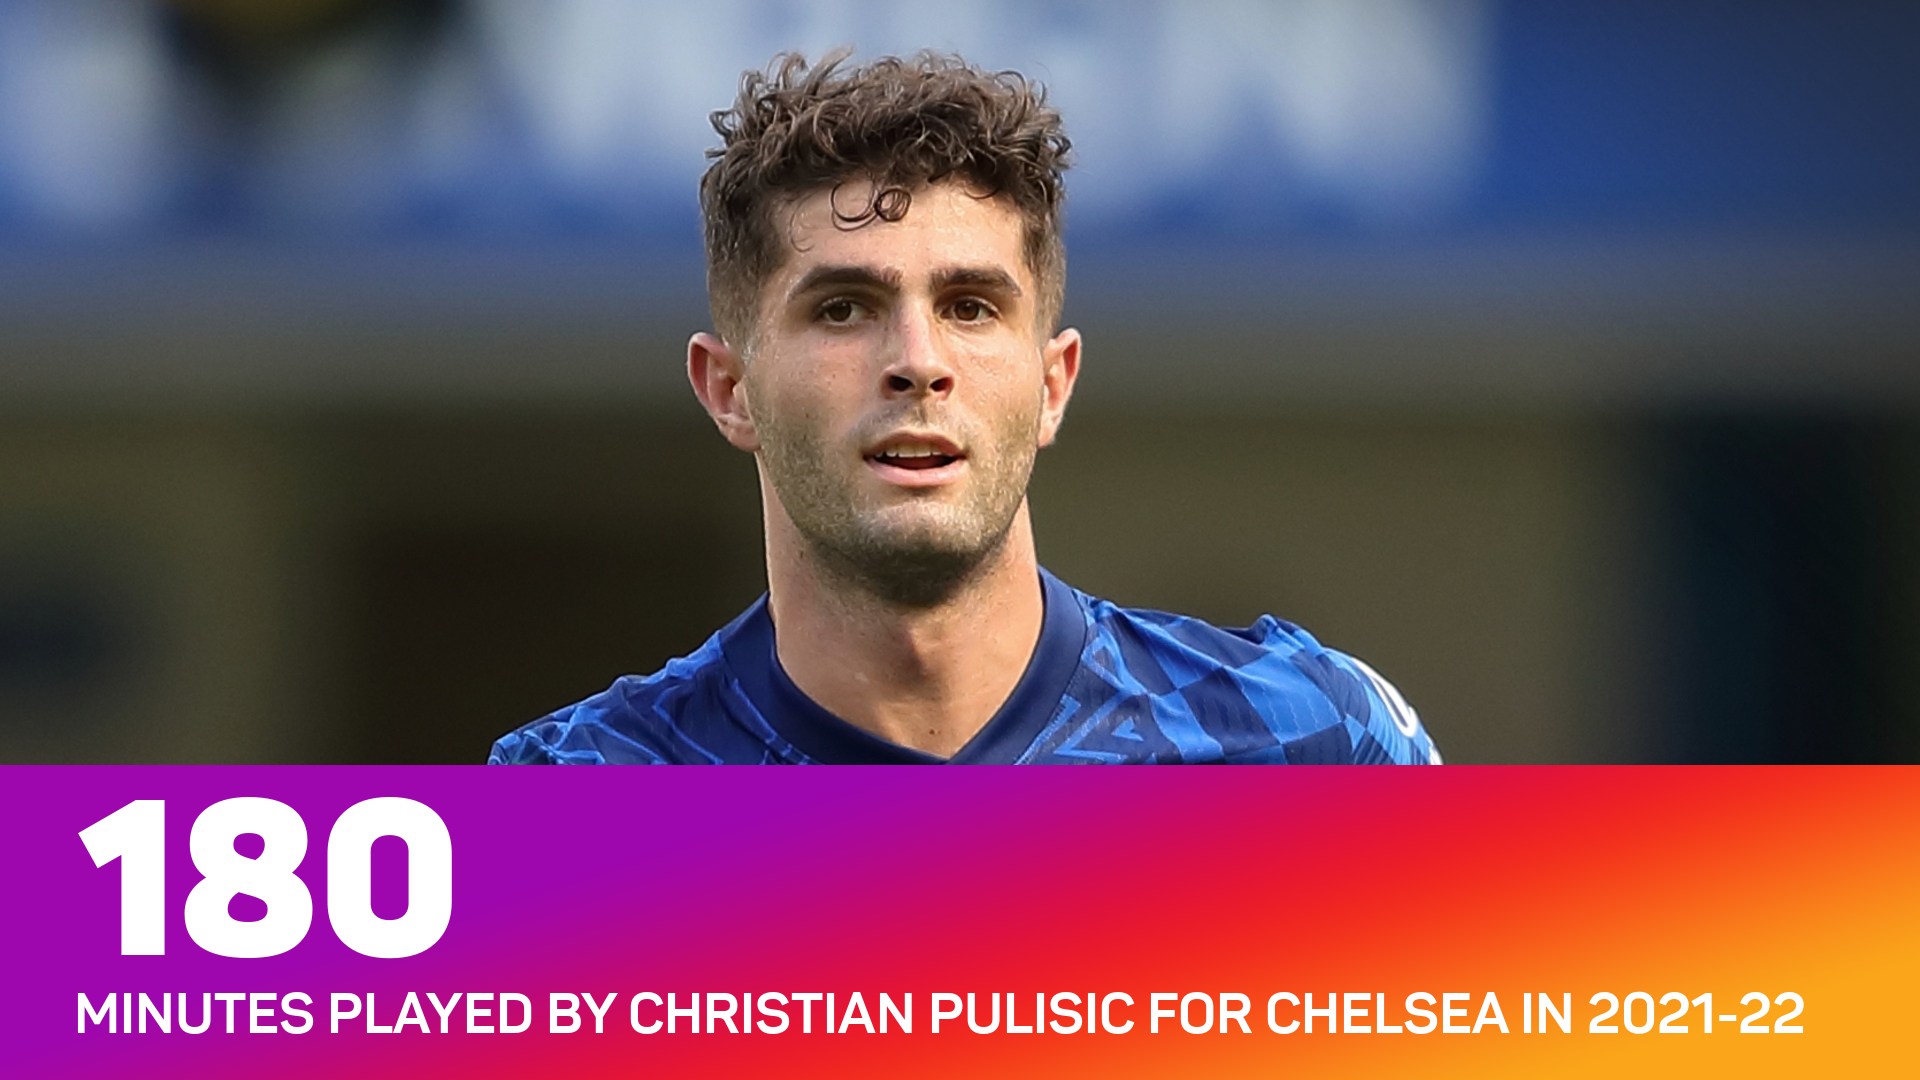 Christian Pulisic has played just 180 minutes for Chelsea this season